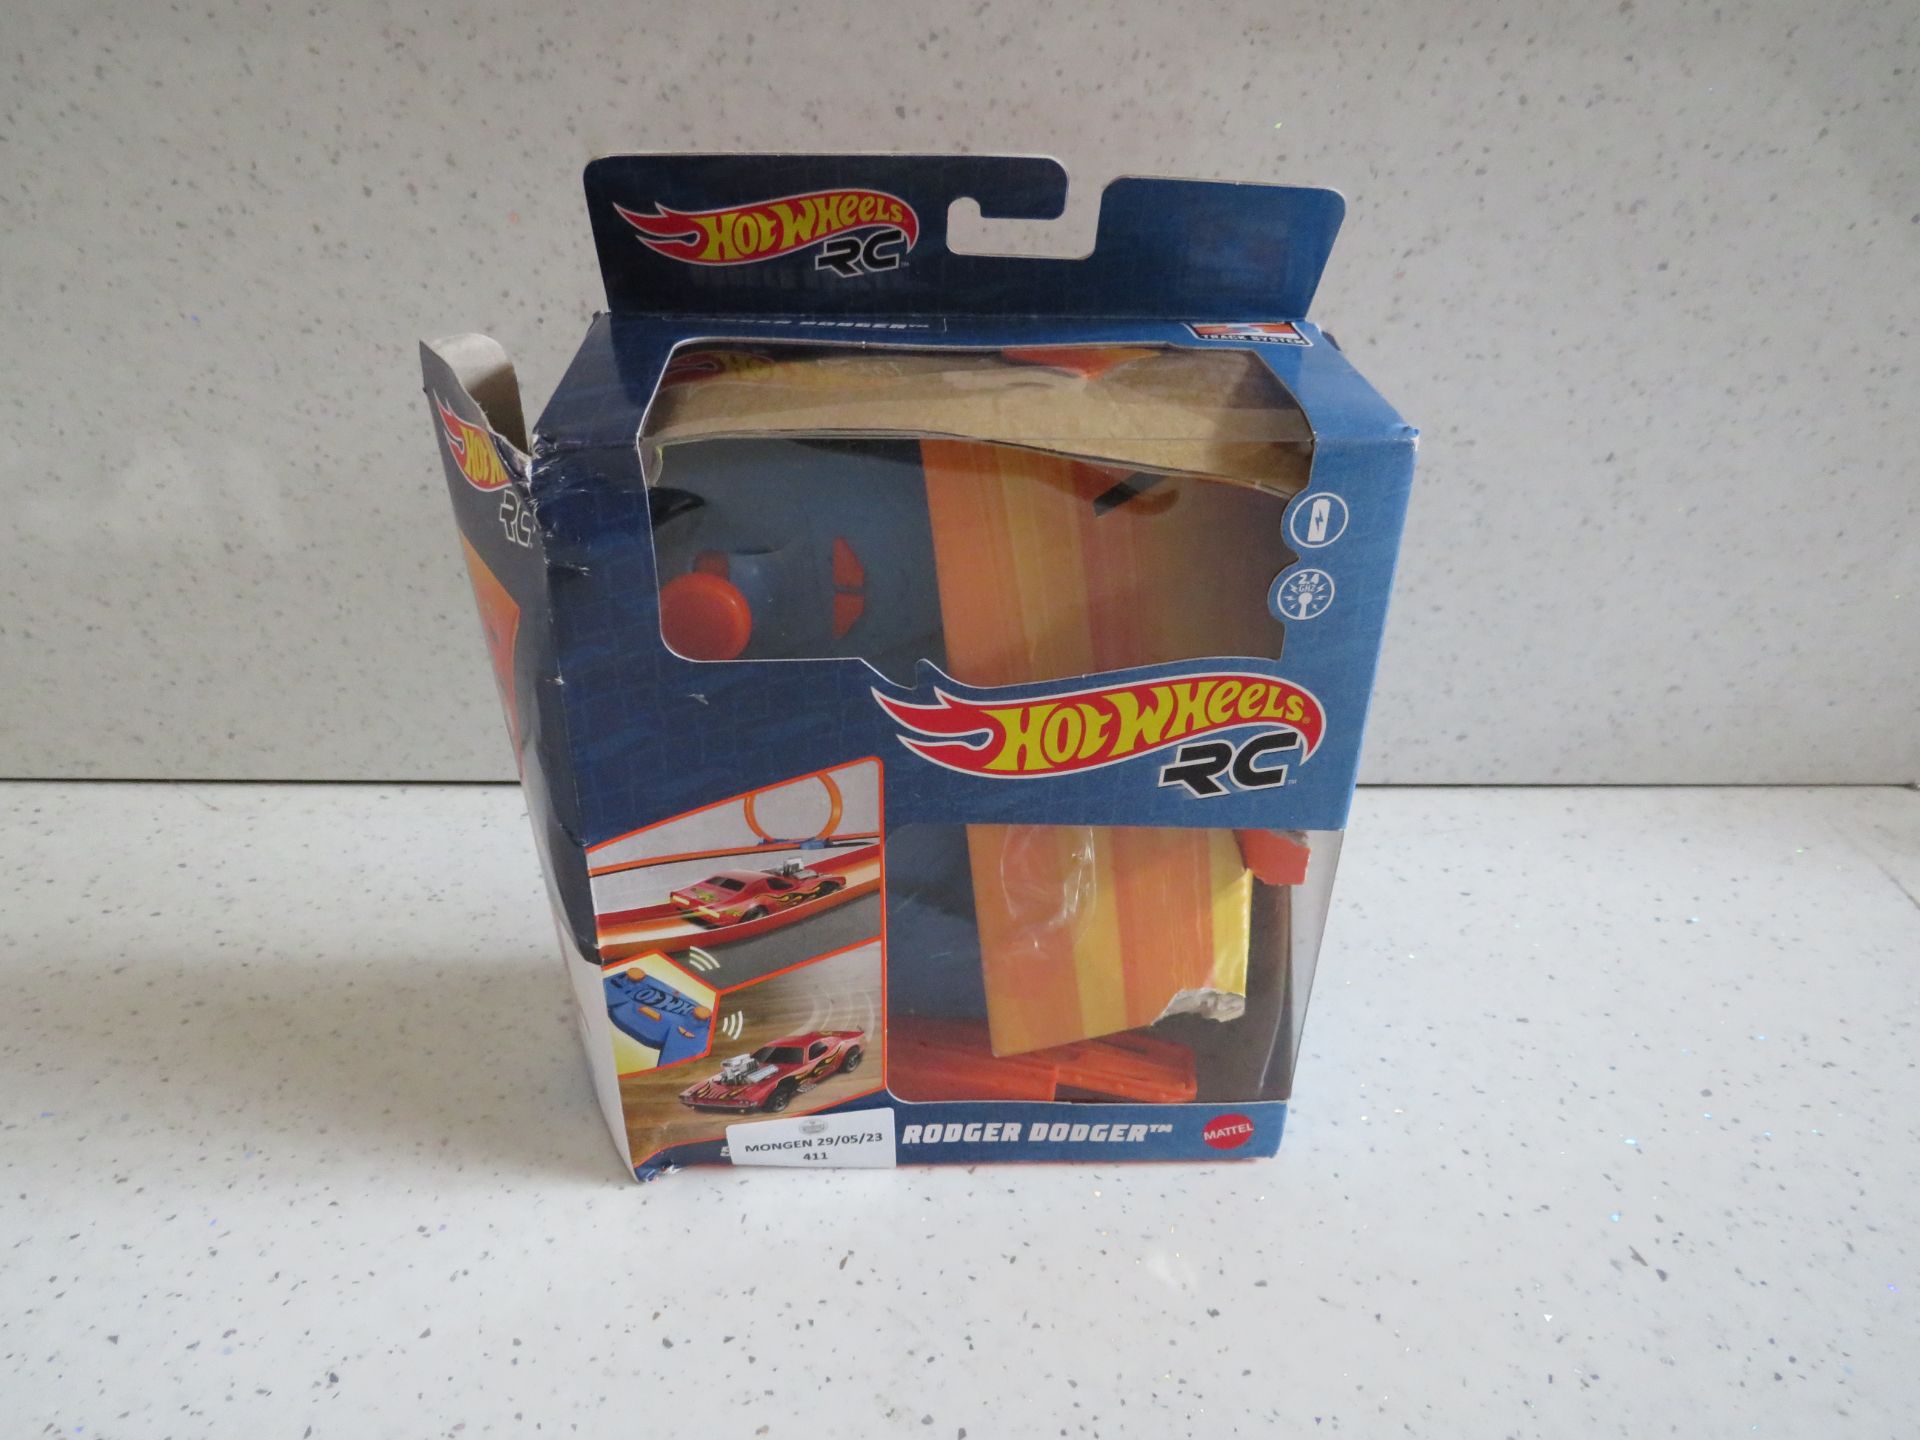 HotWheels - Roger Dodger RC Car - Unchecked & Boxed.